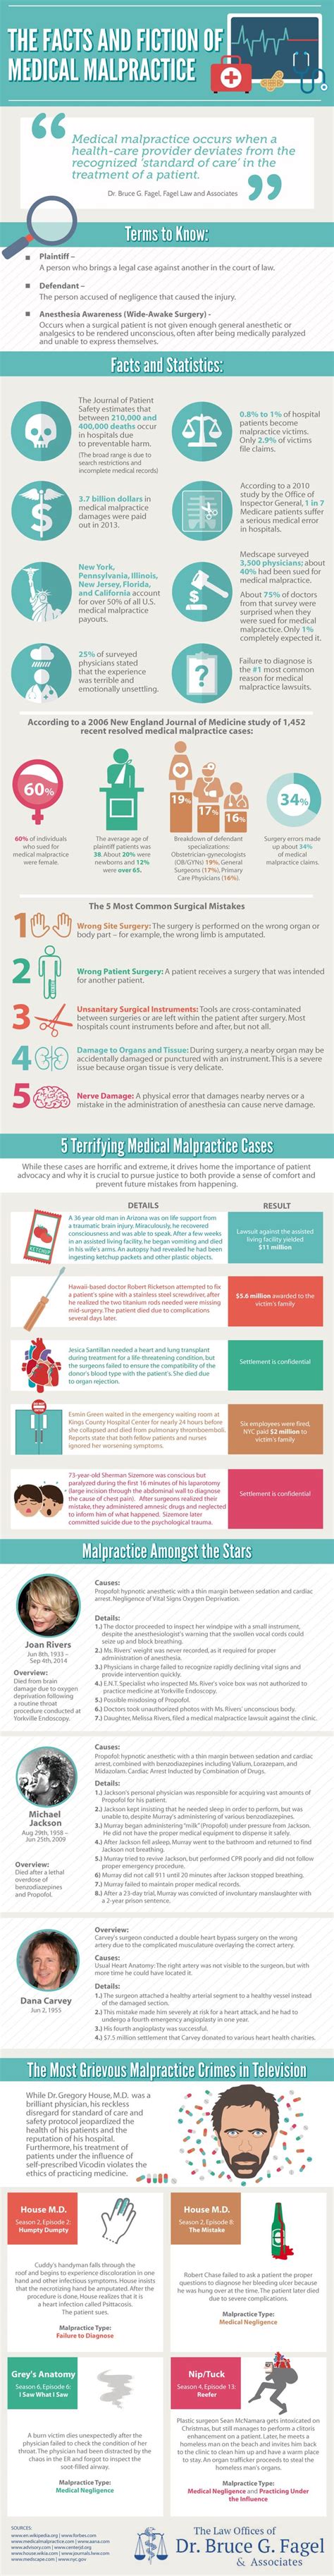 Psychology The Facts And Fiction Of Medical Malpractice